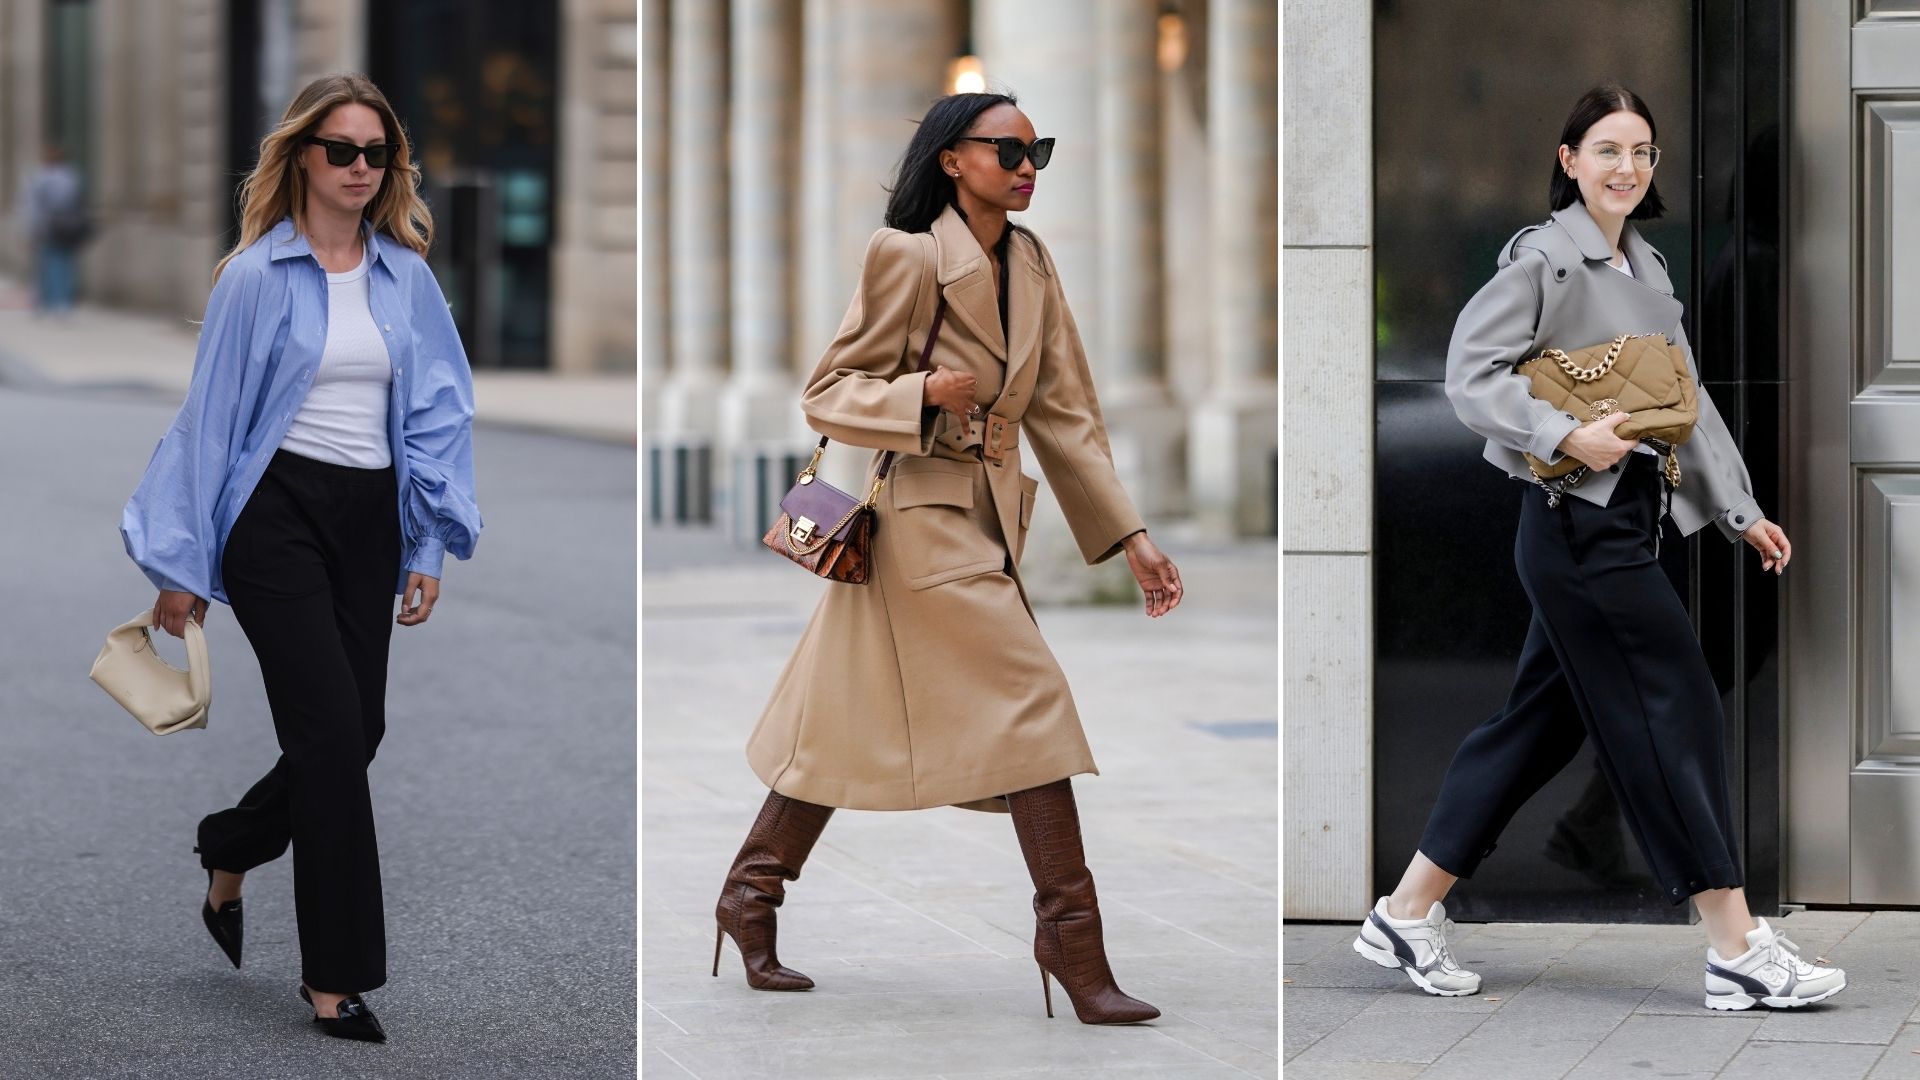 How to dress simple but stylish according to fashion experts